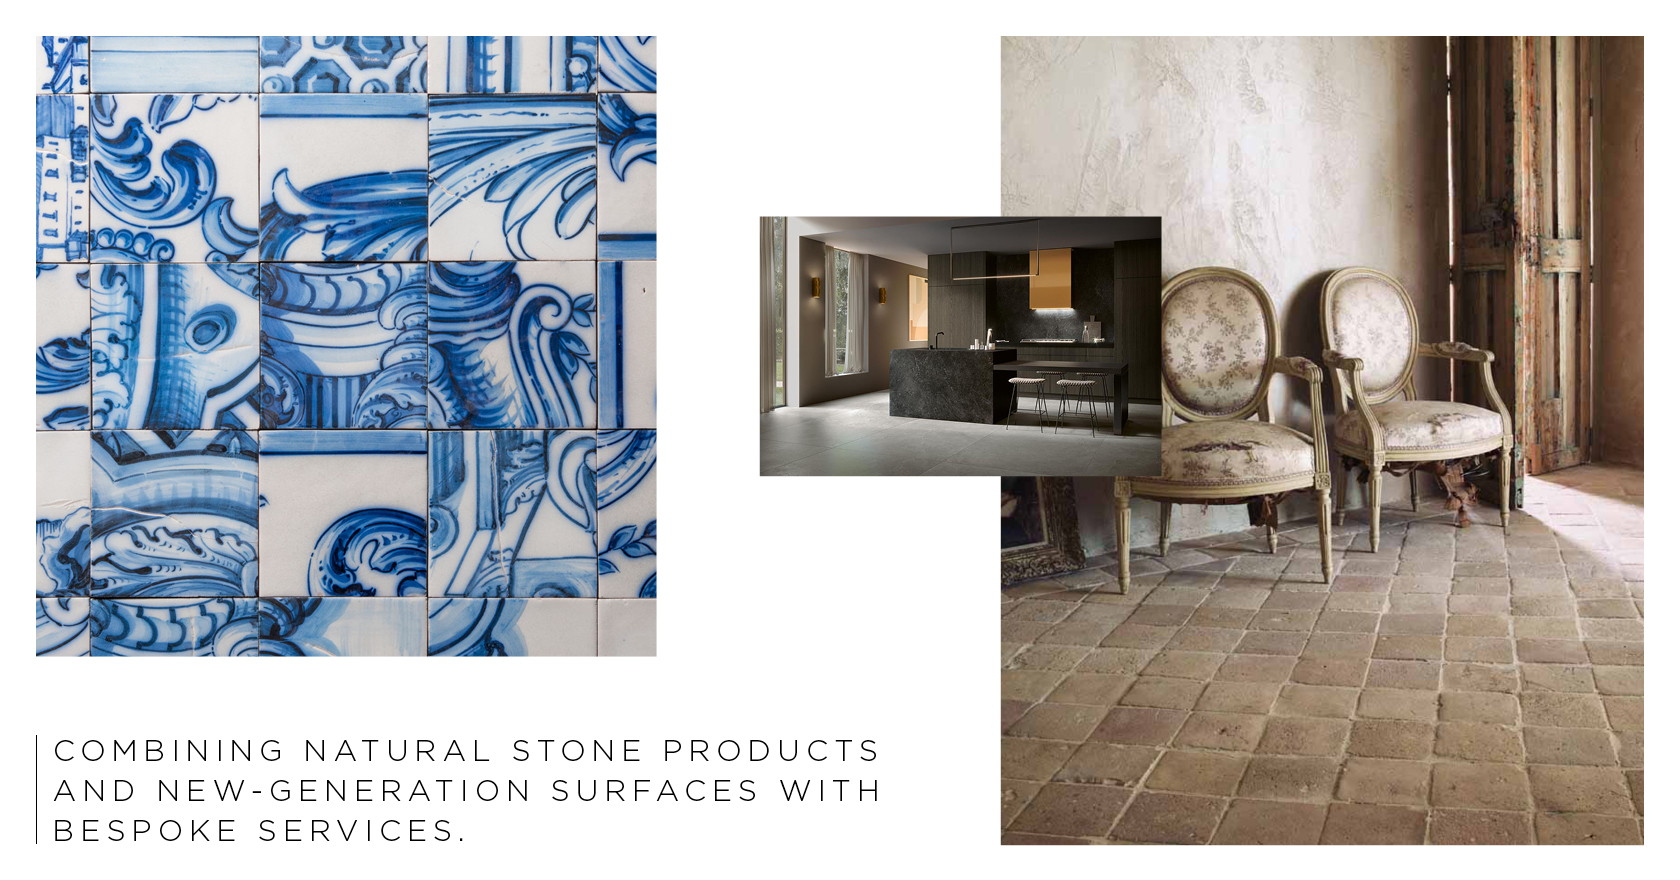 Lapicida works alongside leading interior designers, architects and garden designers for wall tiles, floor tiles and more